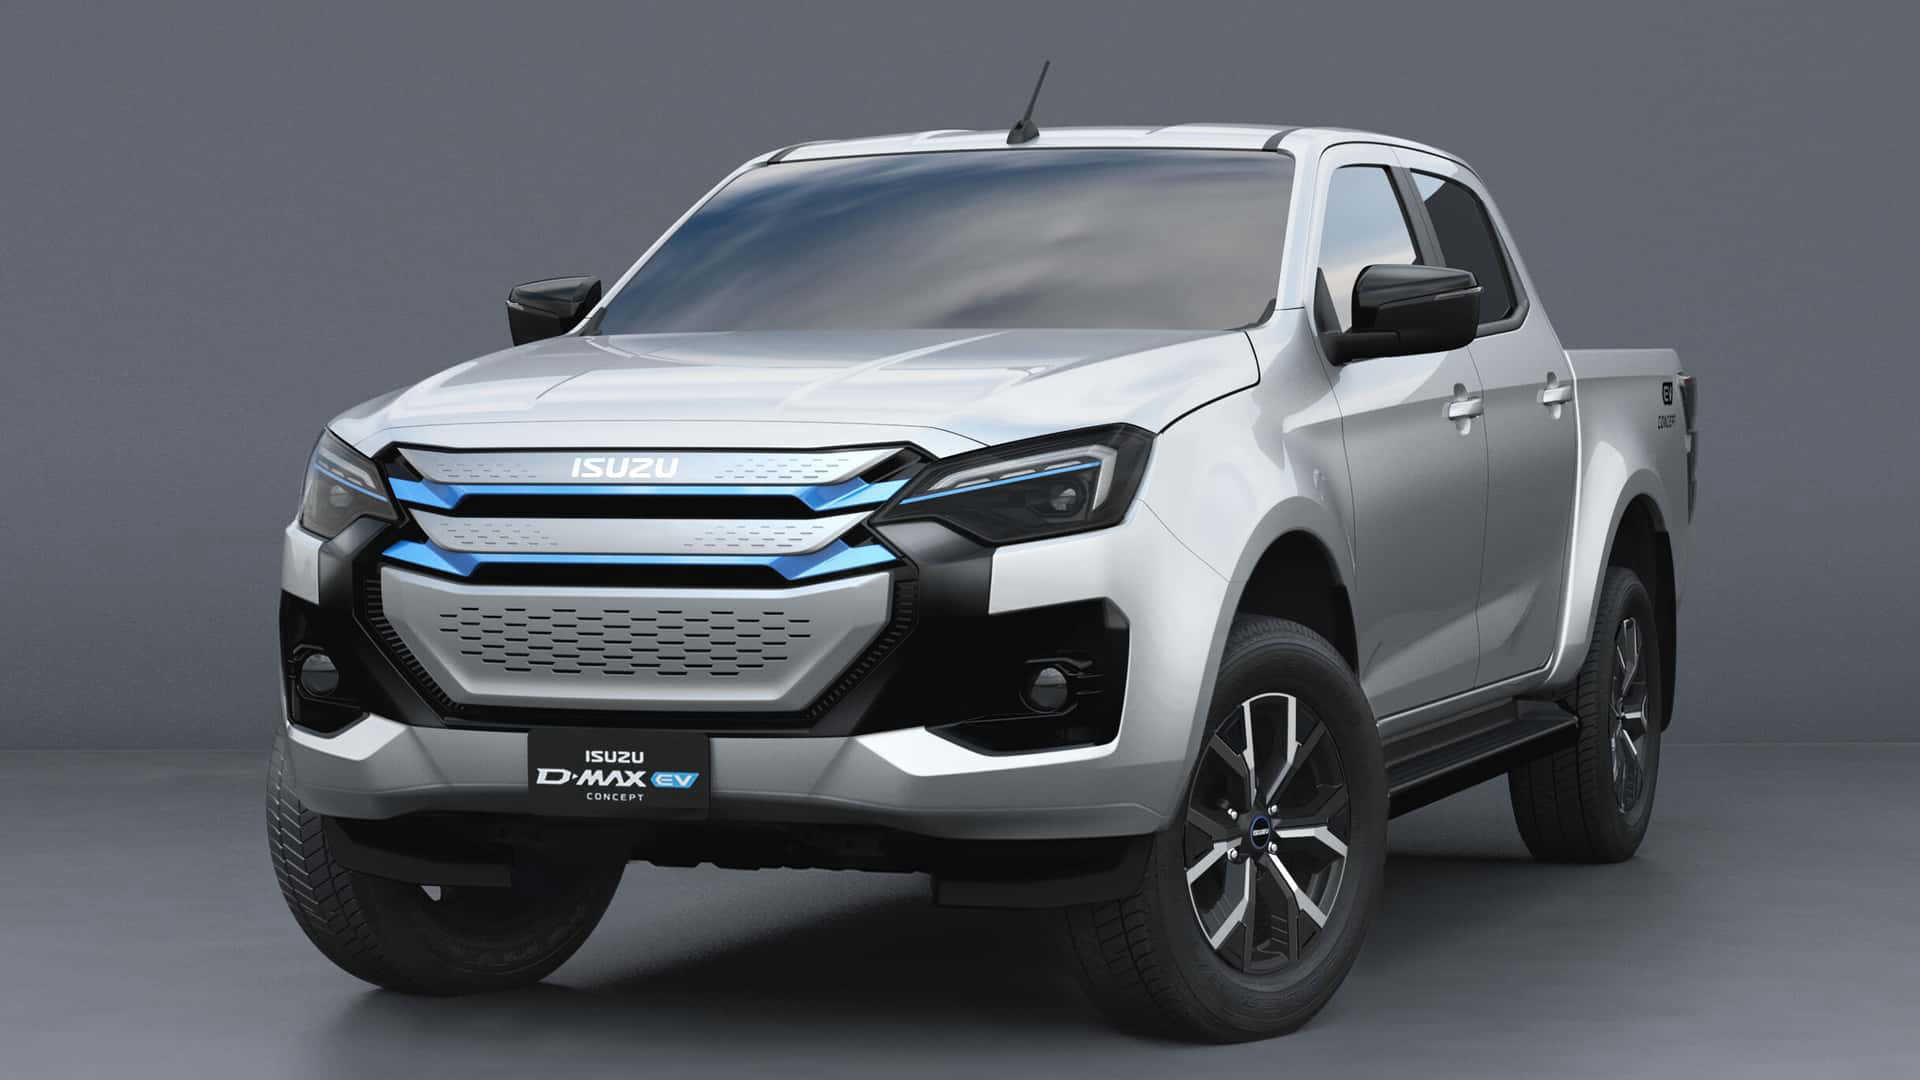 Is the Isuzu D-Max V-Cross still the best pick-up truck in the